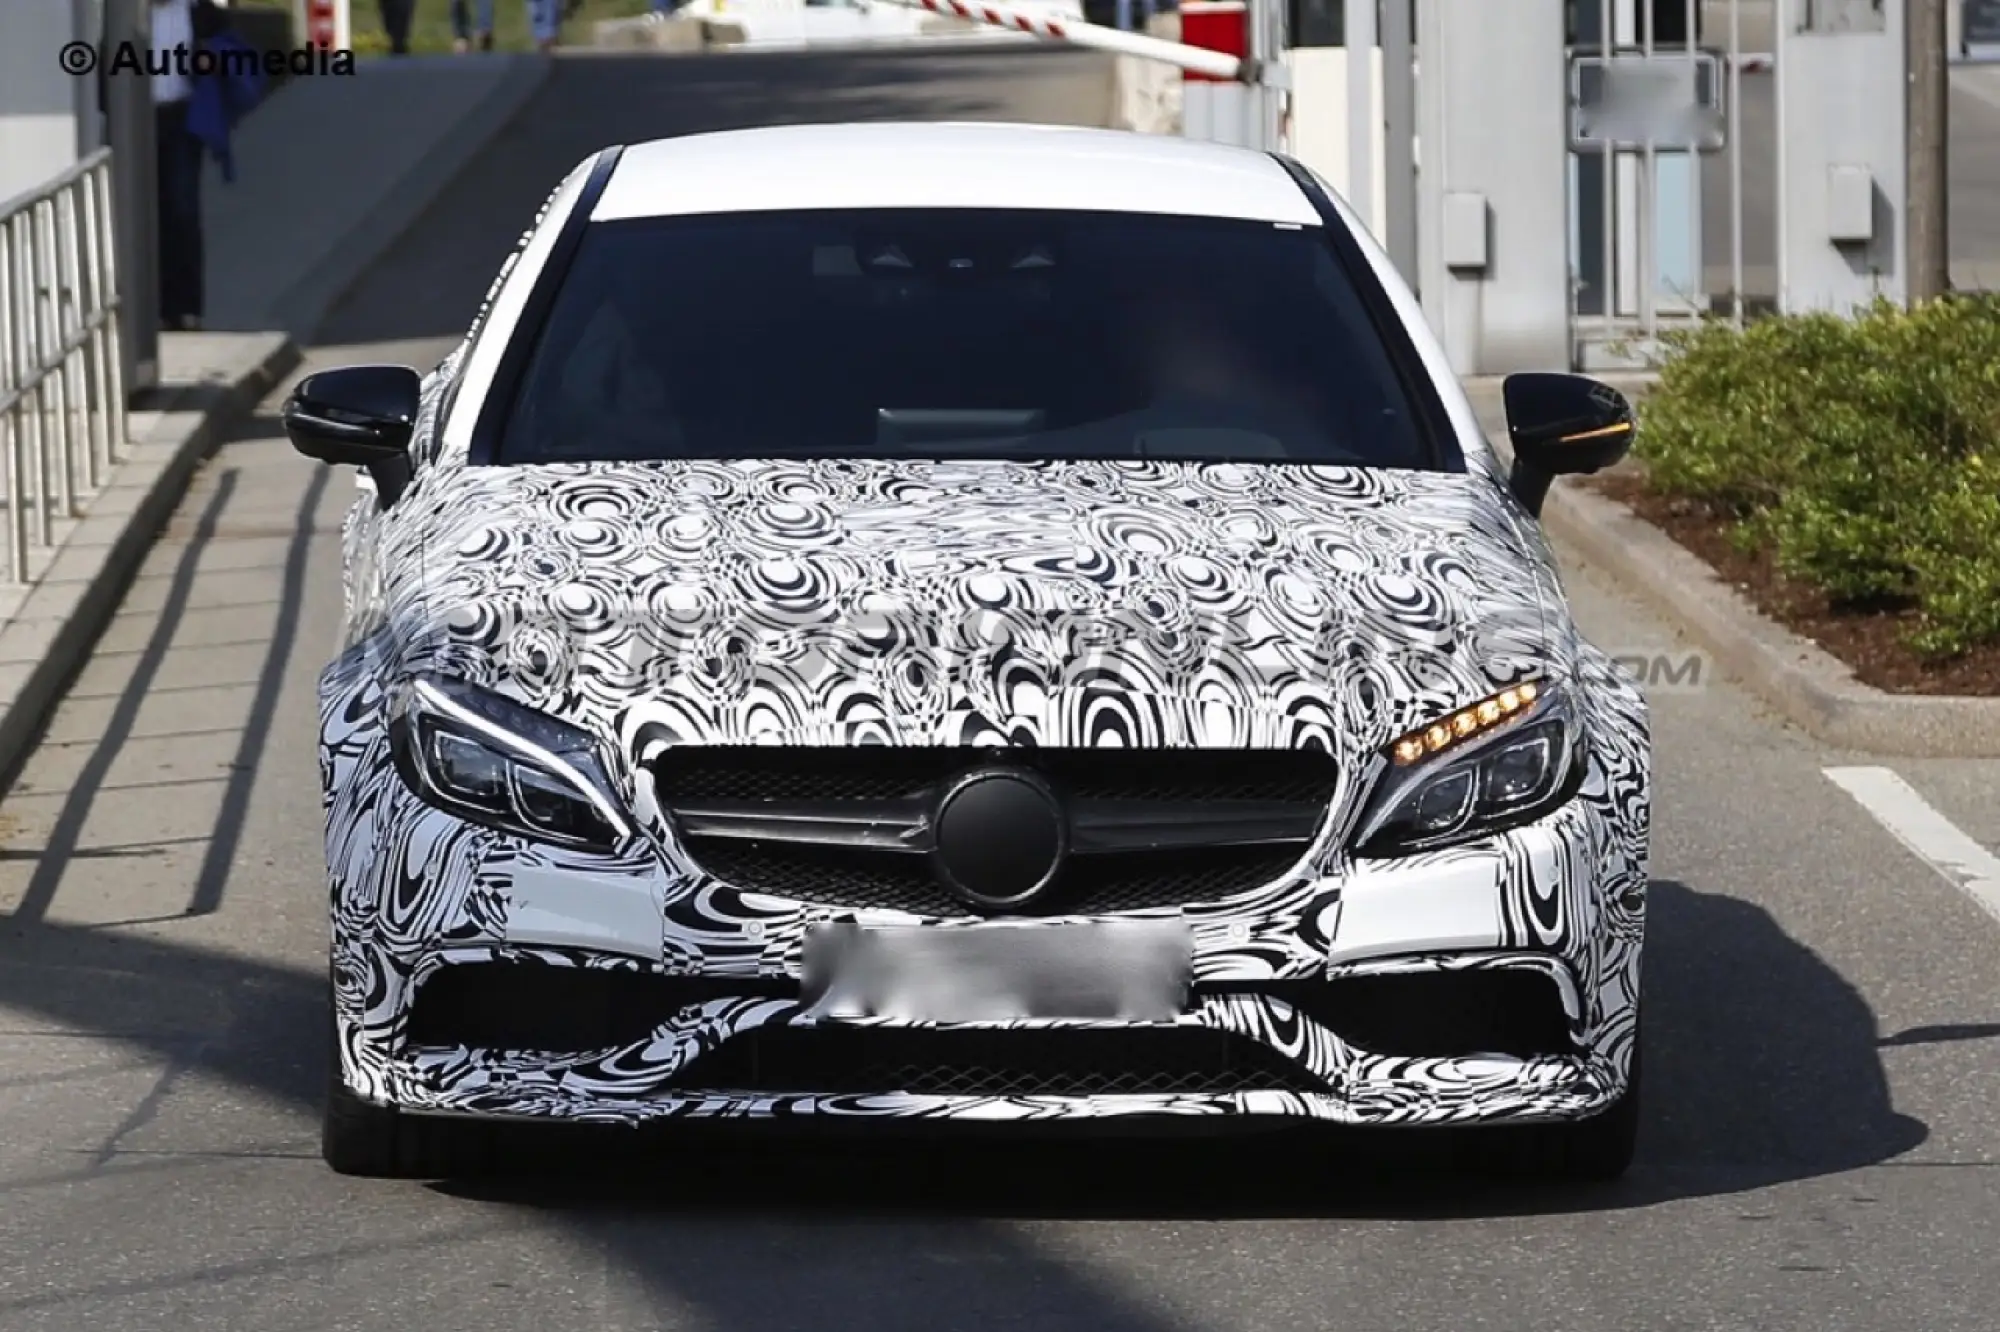 Mercedes C63 AMG Coupe 2016 - Foto spia 05-05-2015 - 1